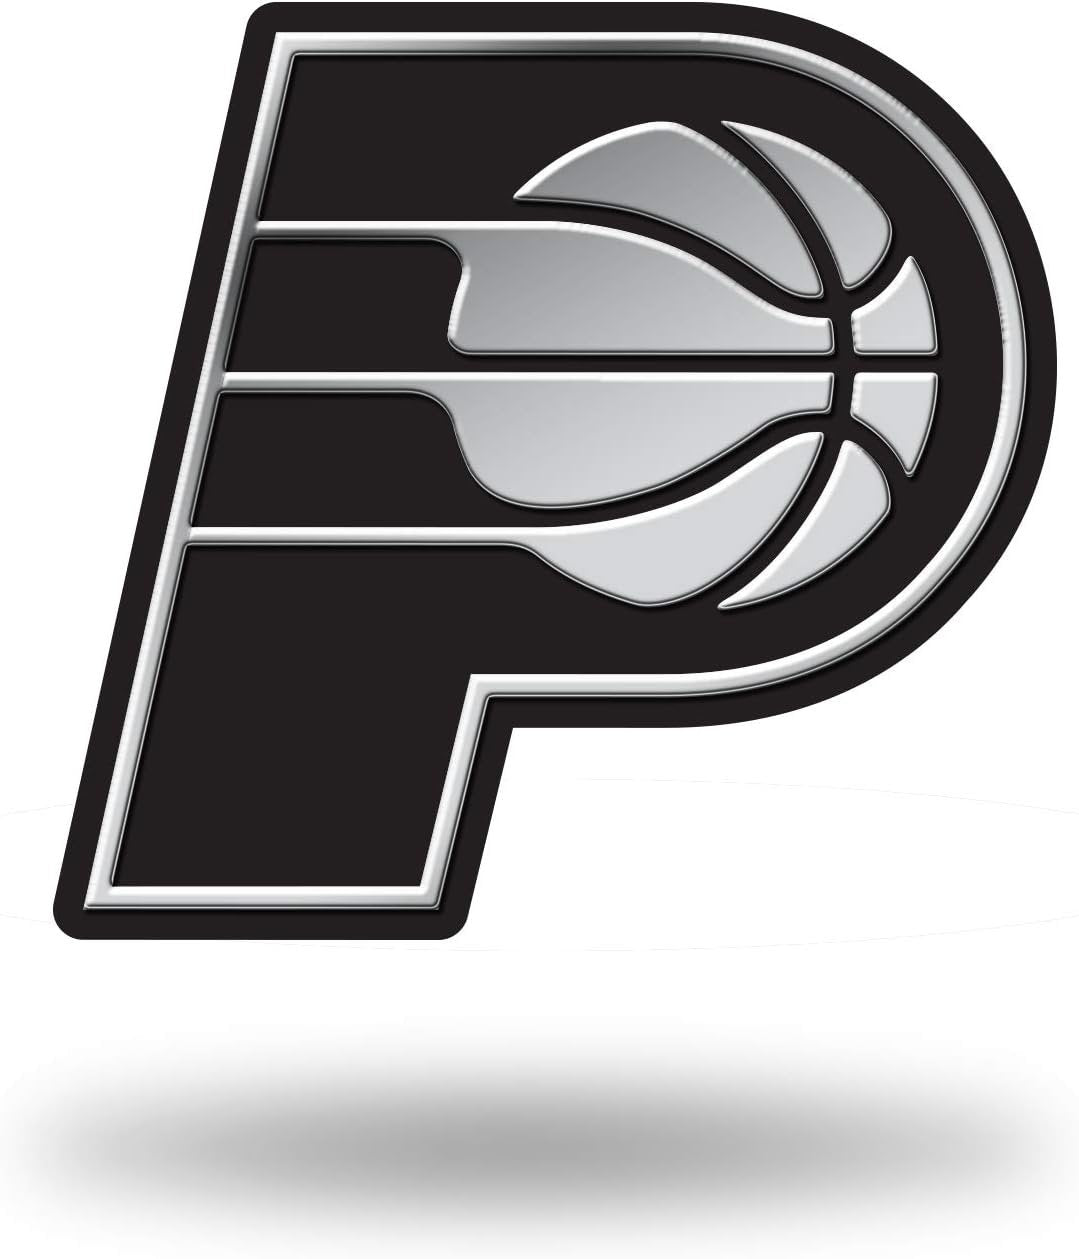 Indiana Pacers Auto Emblem, Silver Chrome Color, Raised Molded Plastic, Adhesive Tape Backing